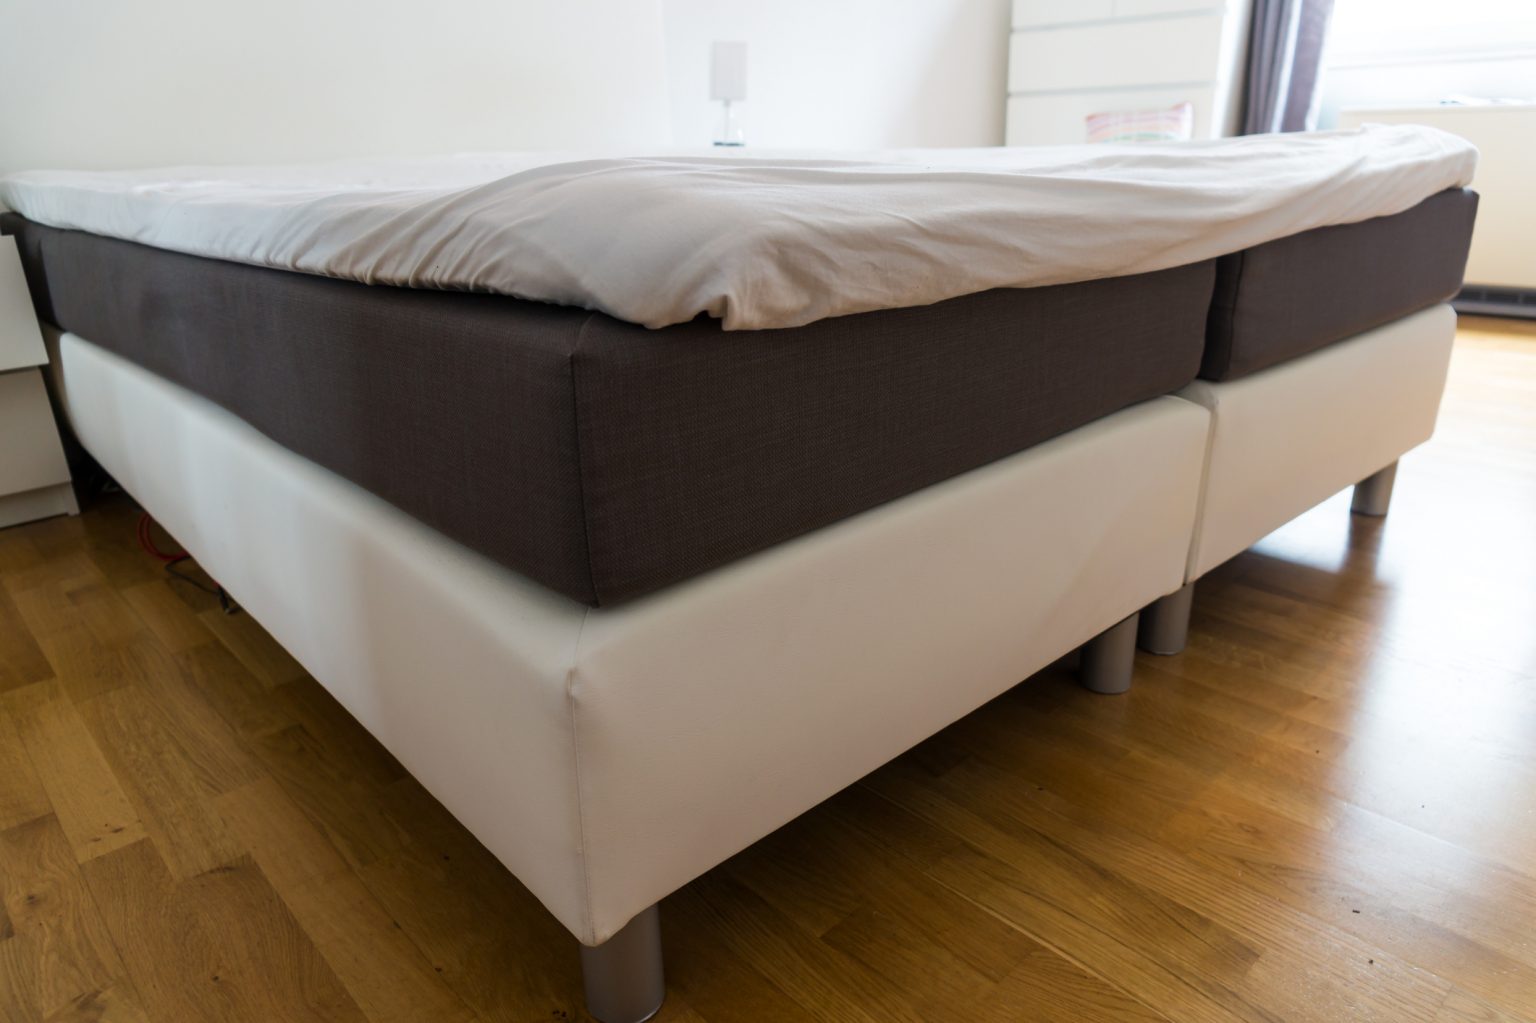 Are Bed Slats Bad For Mattresses?